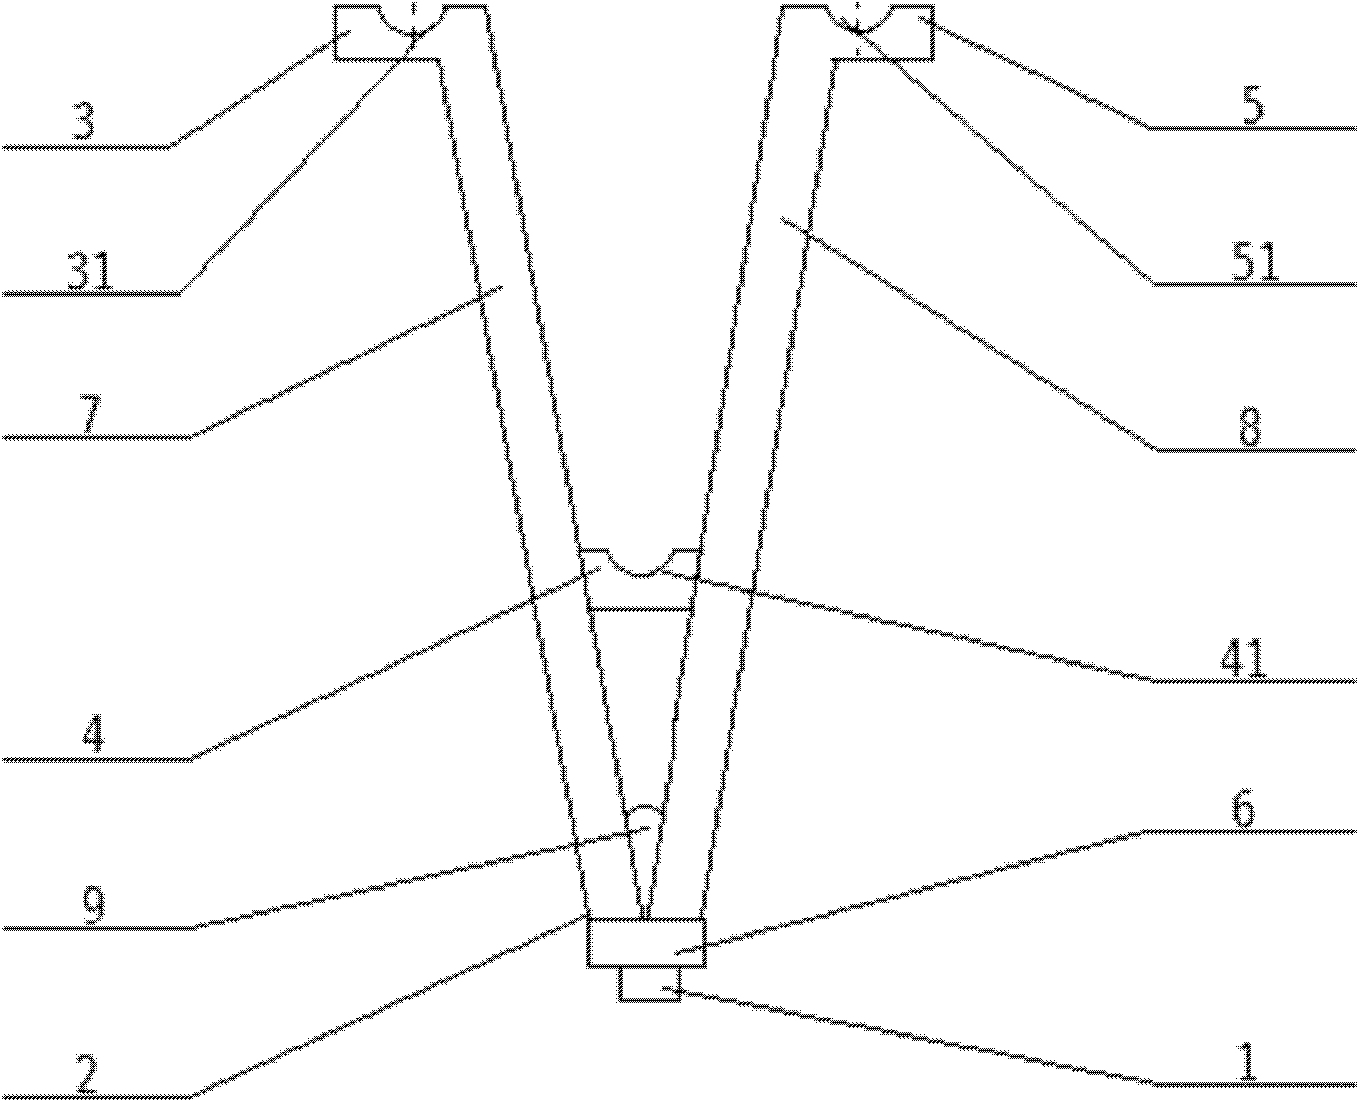 Conductor support frame for mechanical vibrating deicing of three-bundle conductor